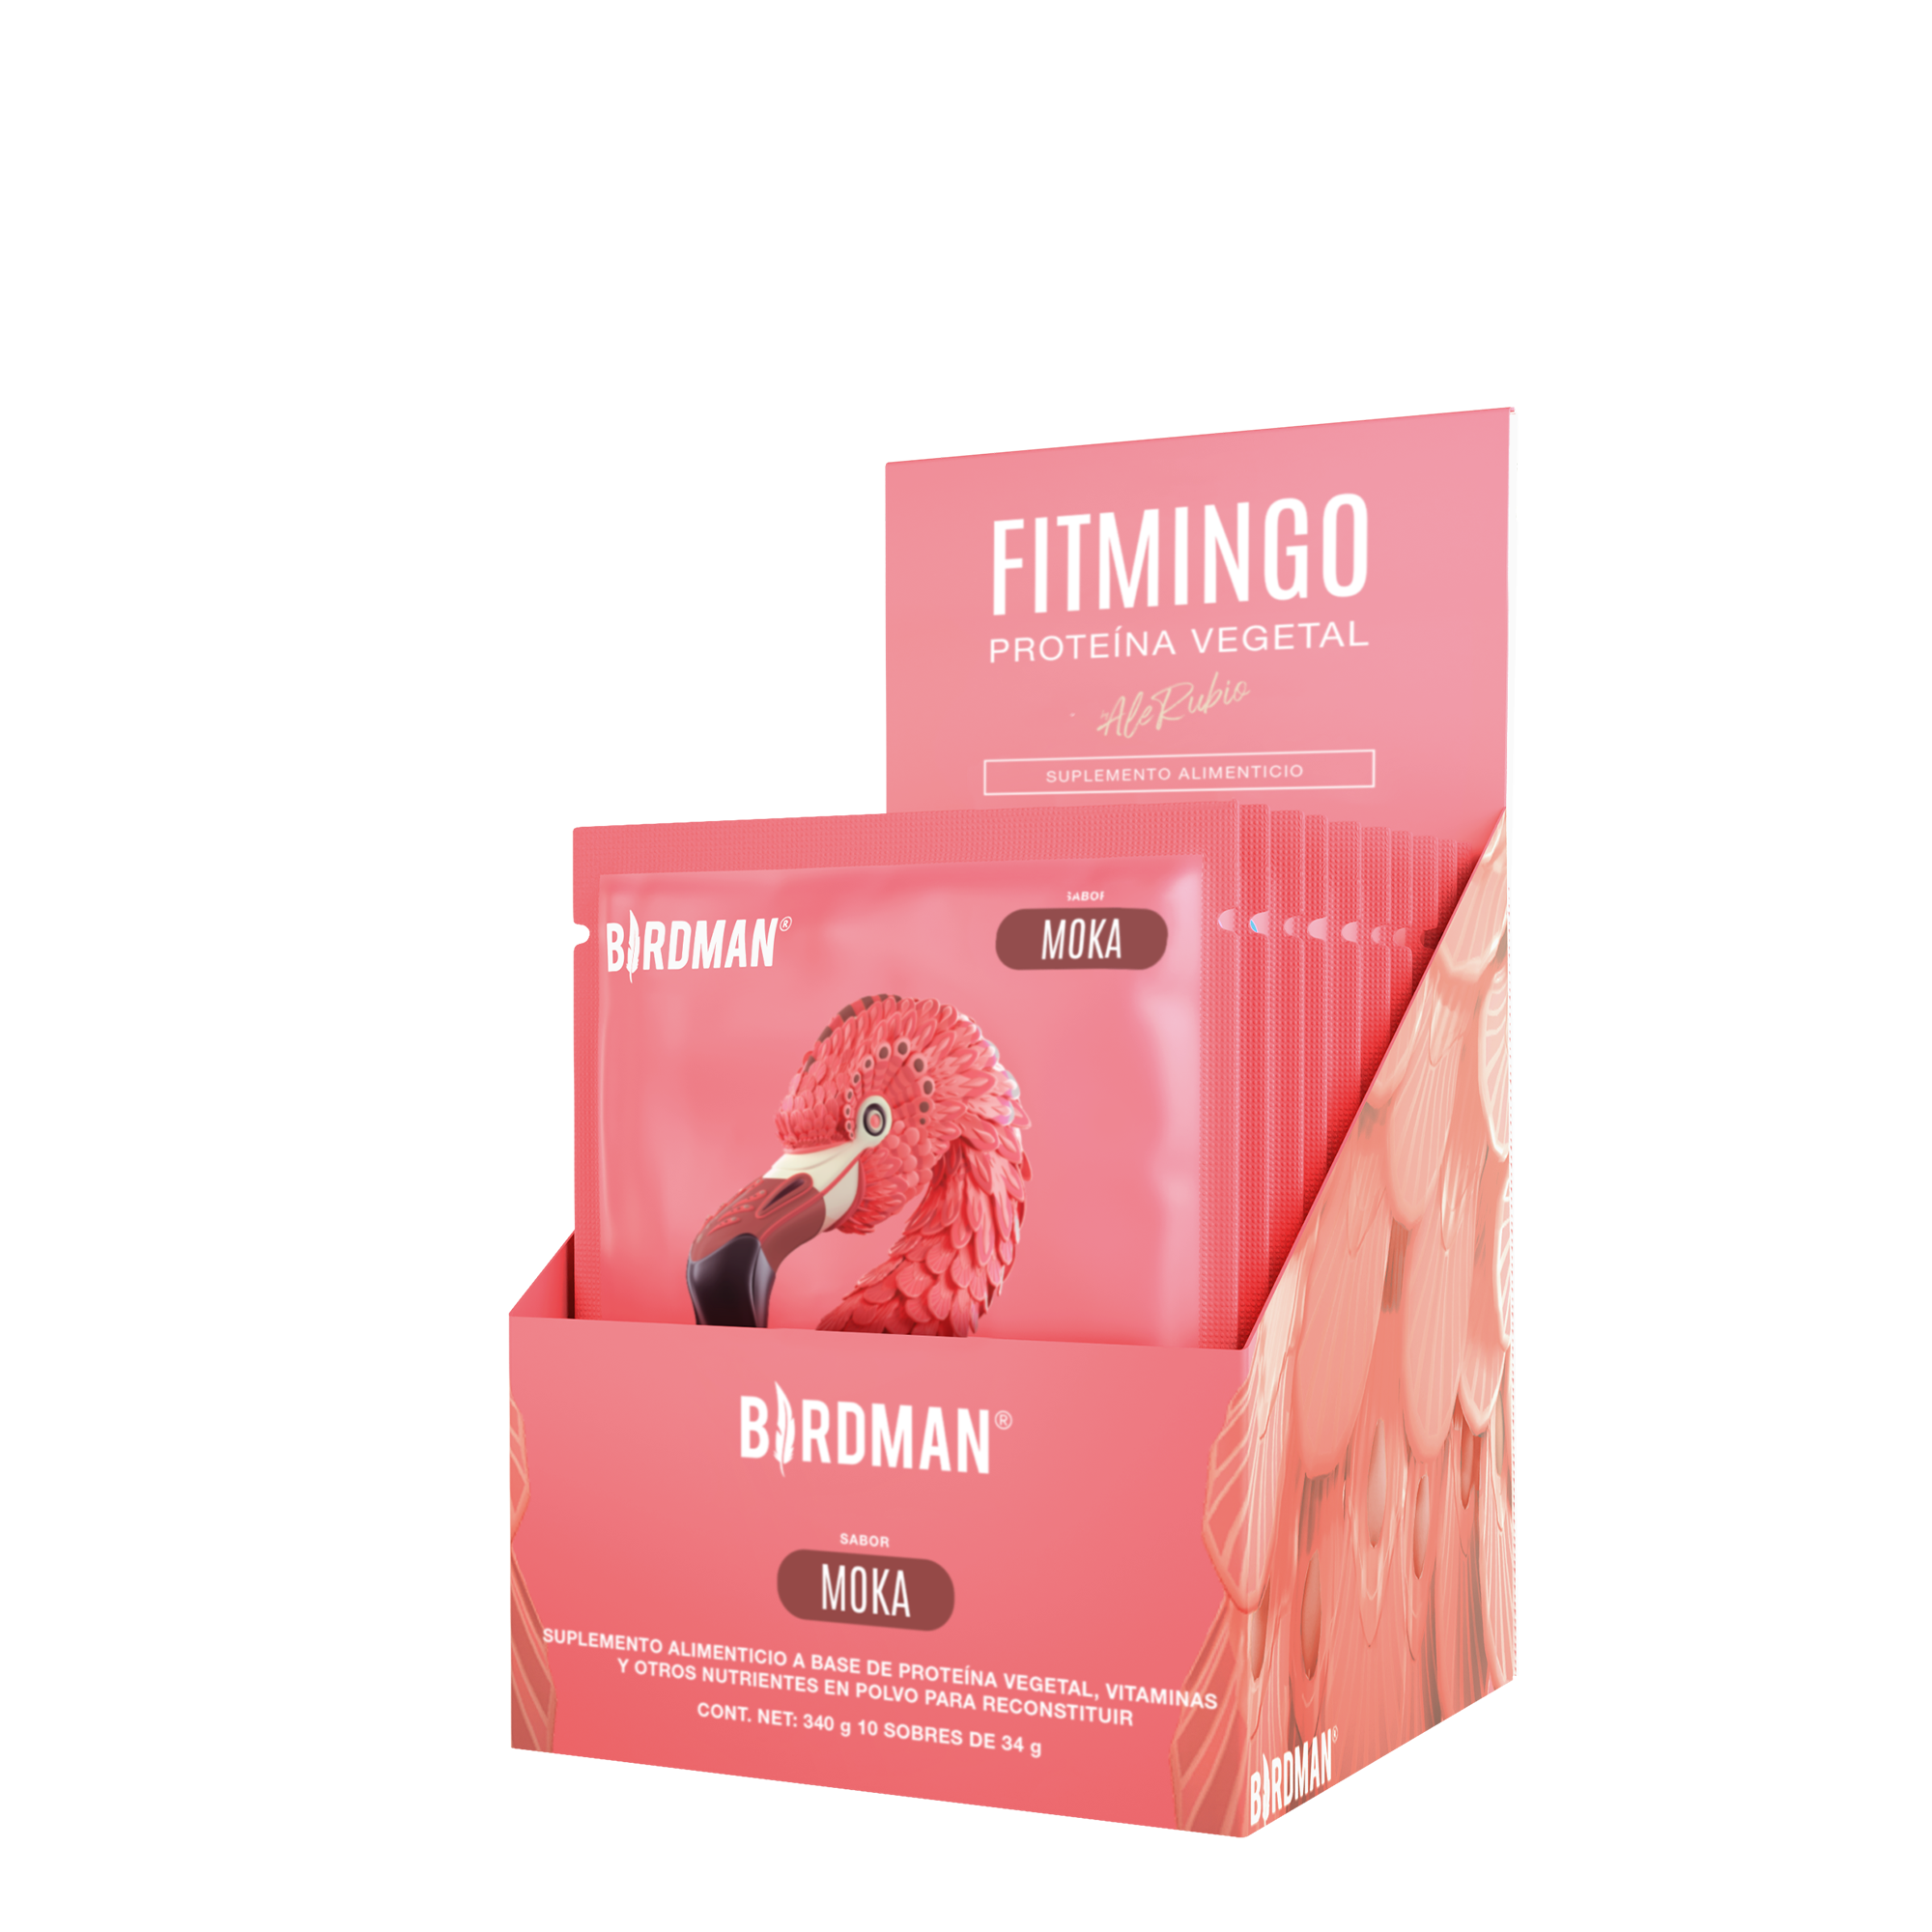 Fitmingo Protein 10 pack sobres